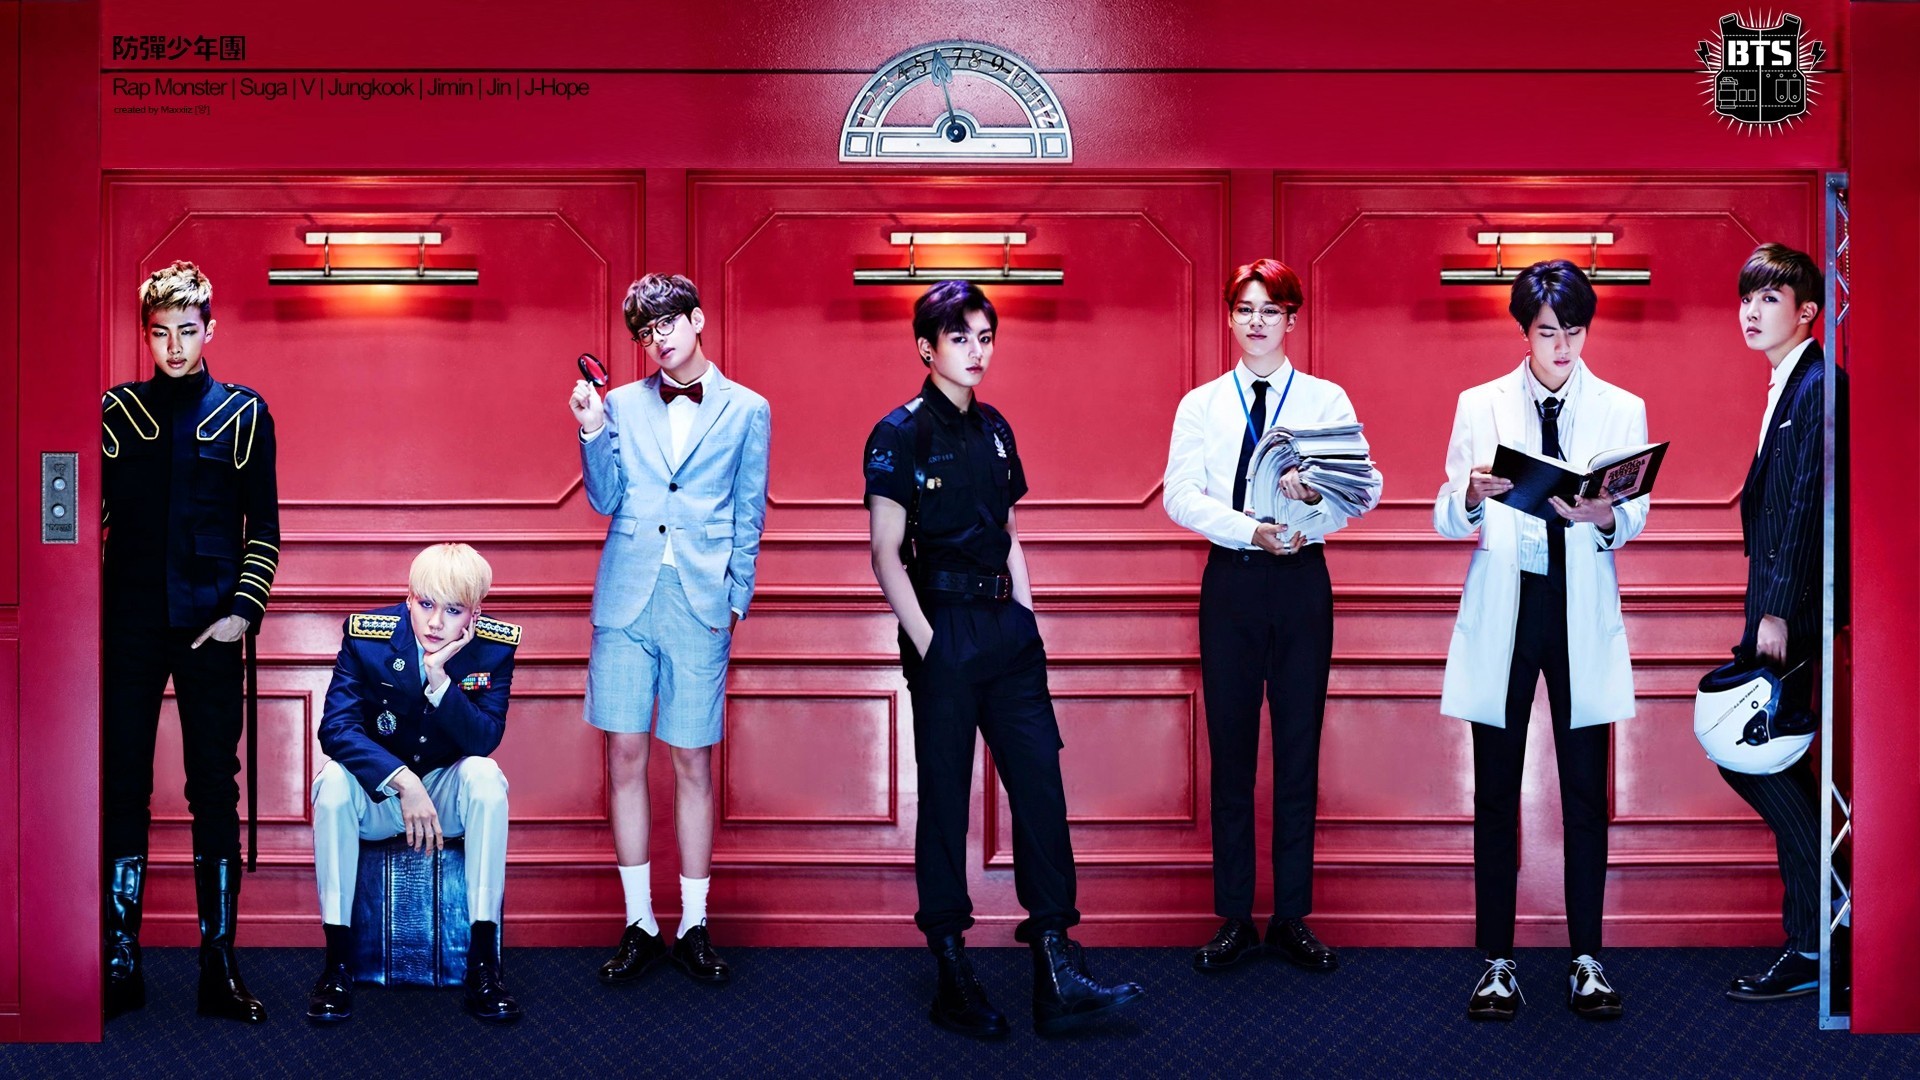 BTS Lover? Check Out 100+ bts cute wallpaper For Your K-Pop Obsession